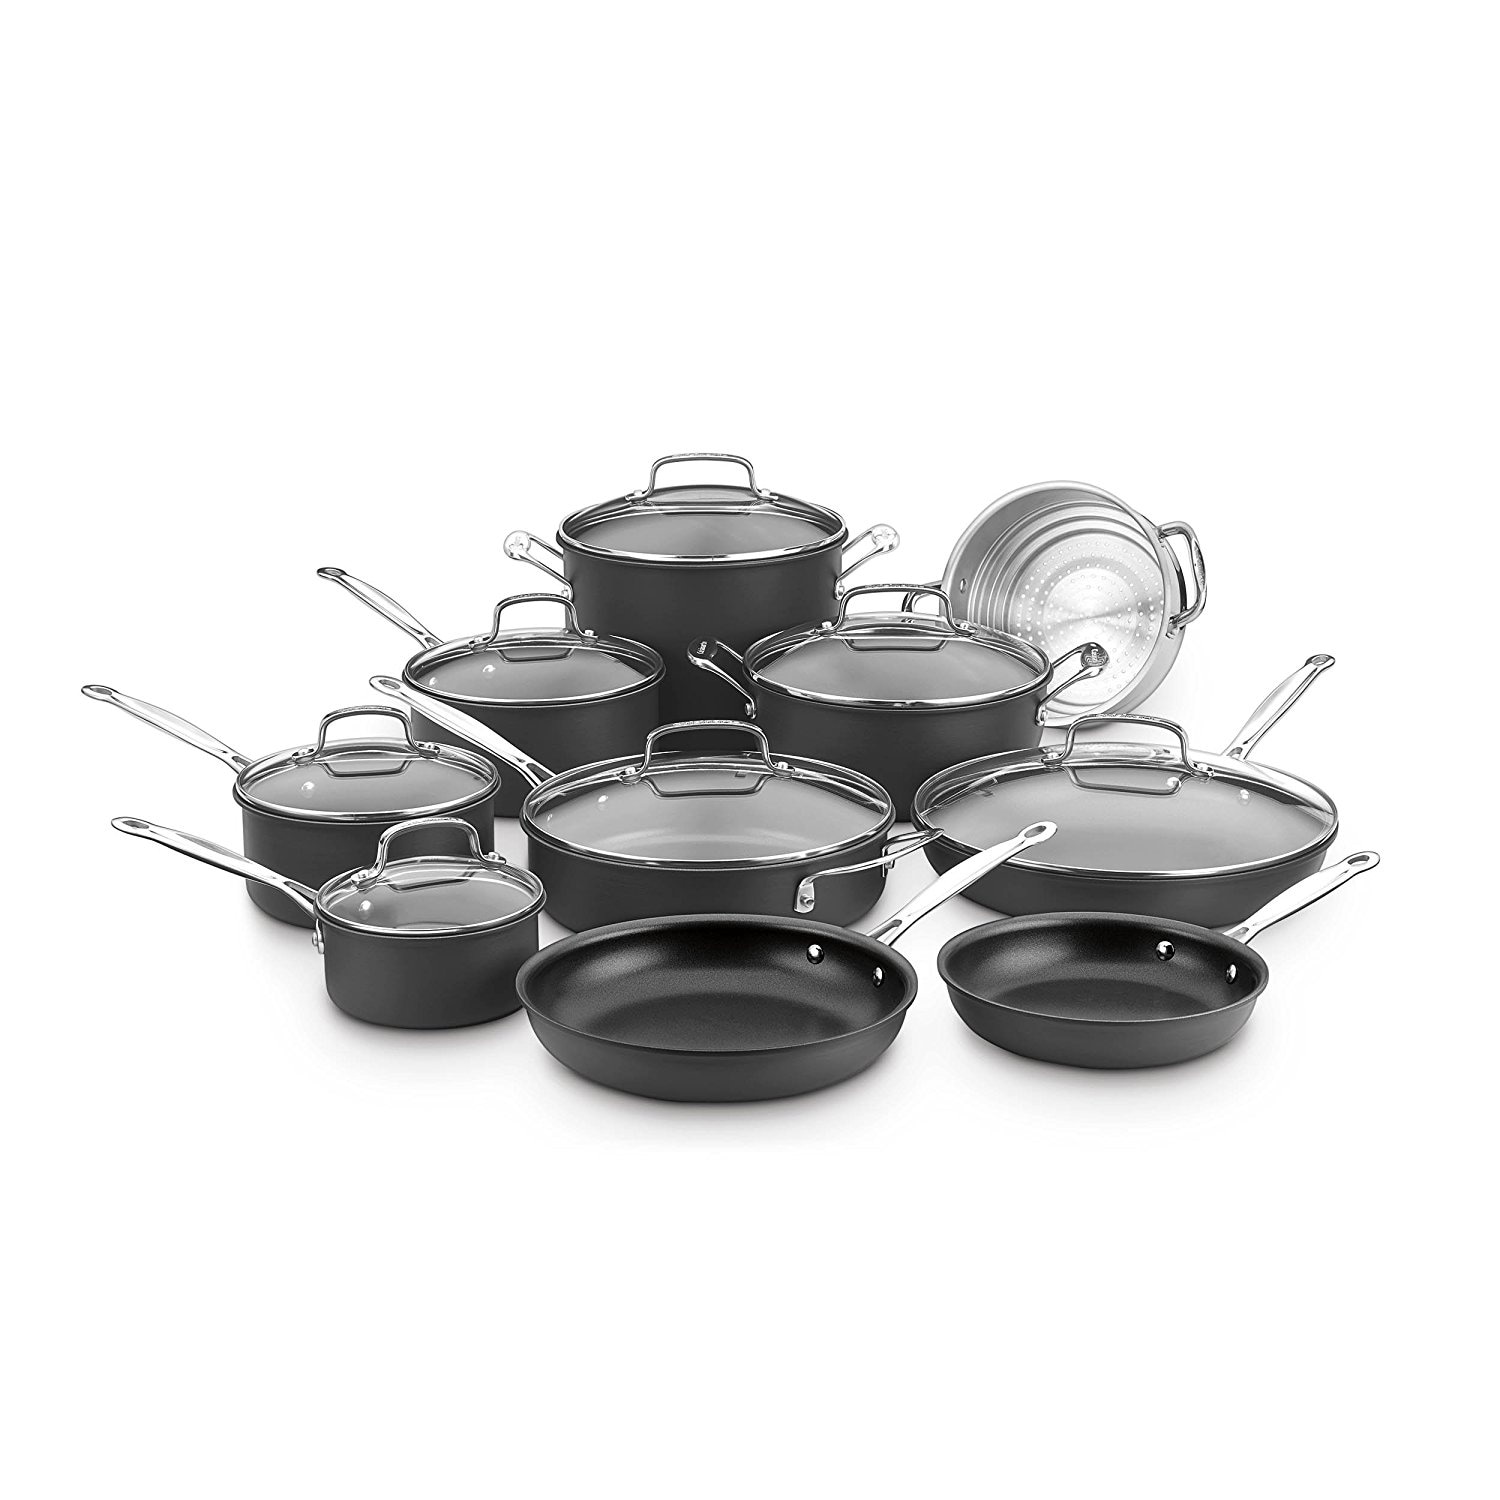 https://ak1.ostkcdn.com/images/products/is/images/direct/9425cf88ae24f83b70db79f97133ac5604bd6821/Cuisinart-66-17N-Chef%27s-Classic-Non-Stick-Hard-Anodized%2C-17-Piece-Set%2C-Black.jpg